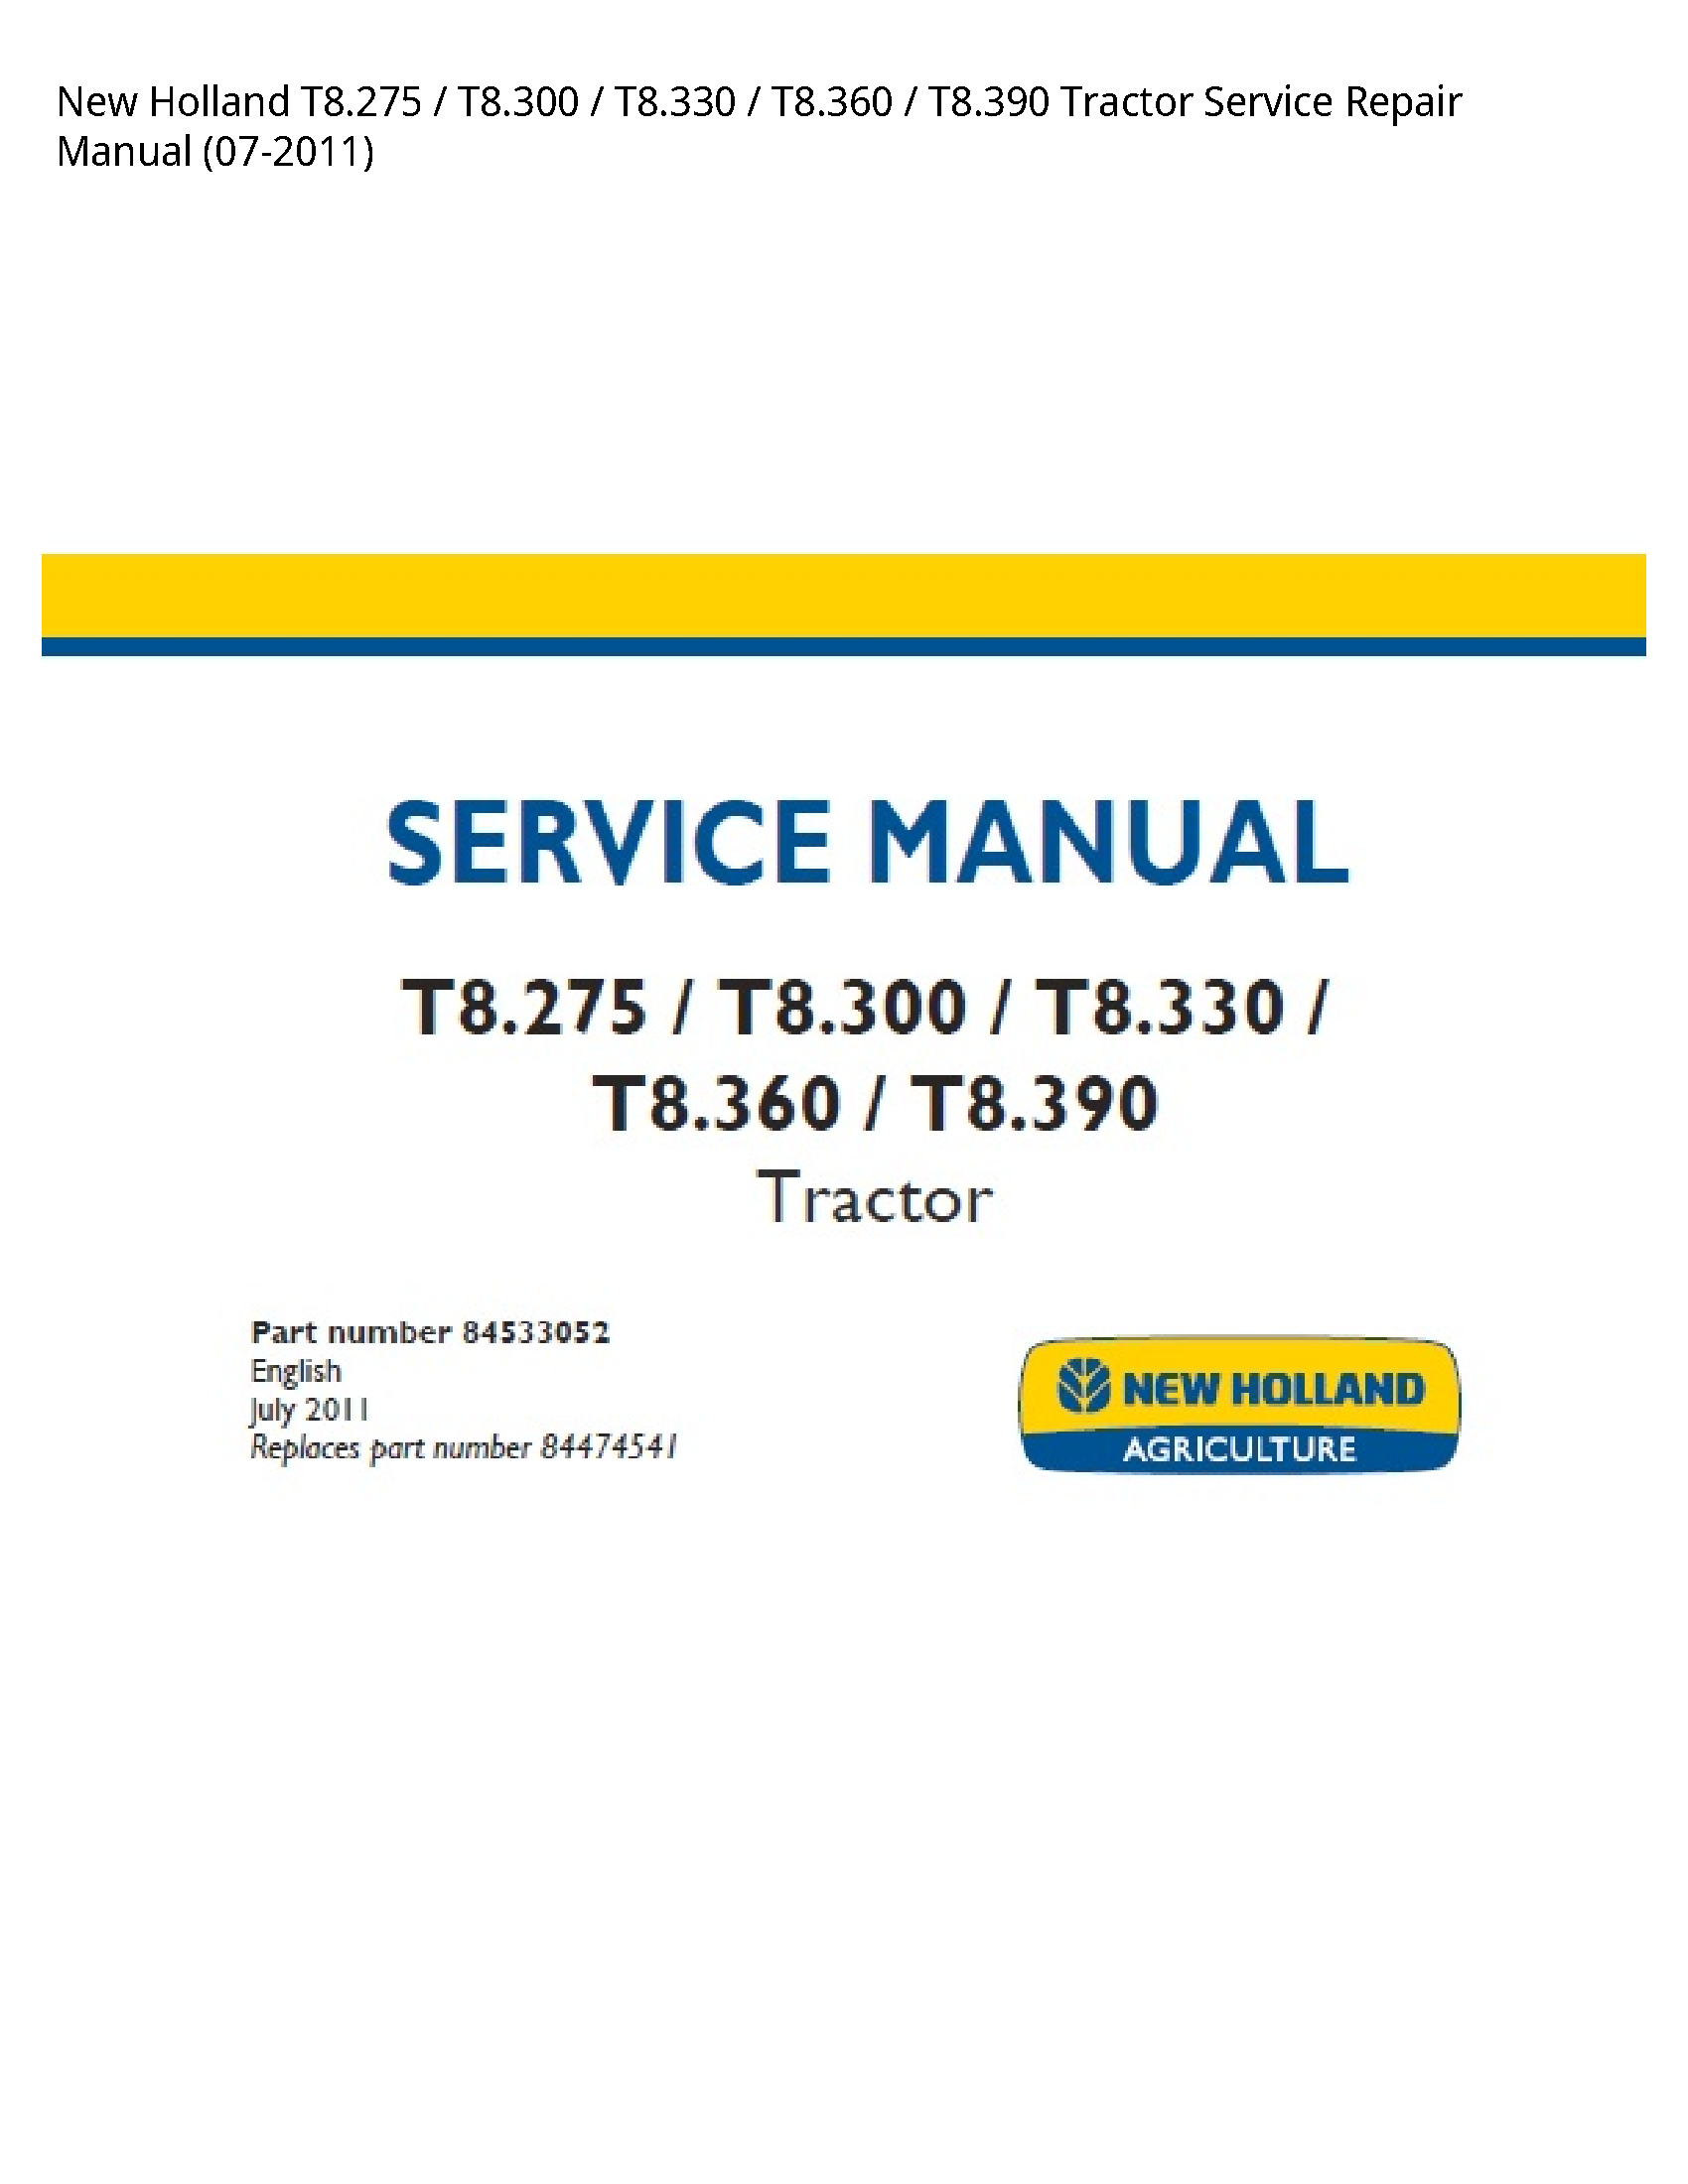 New Holland T8.275 Tractor manual